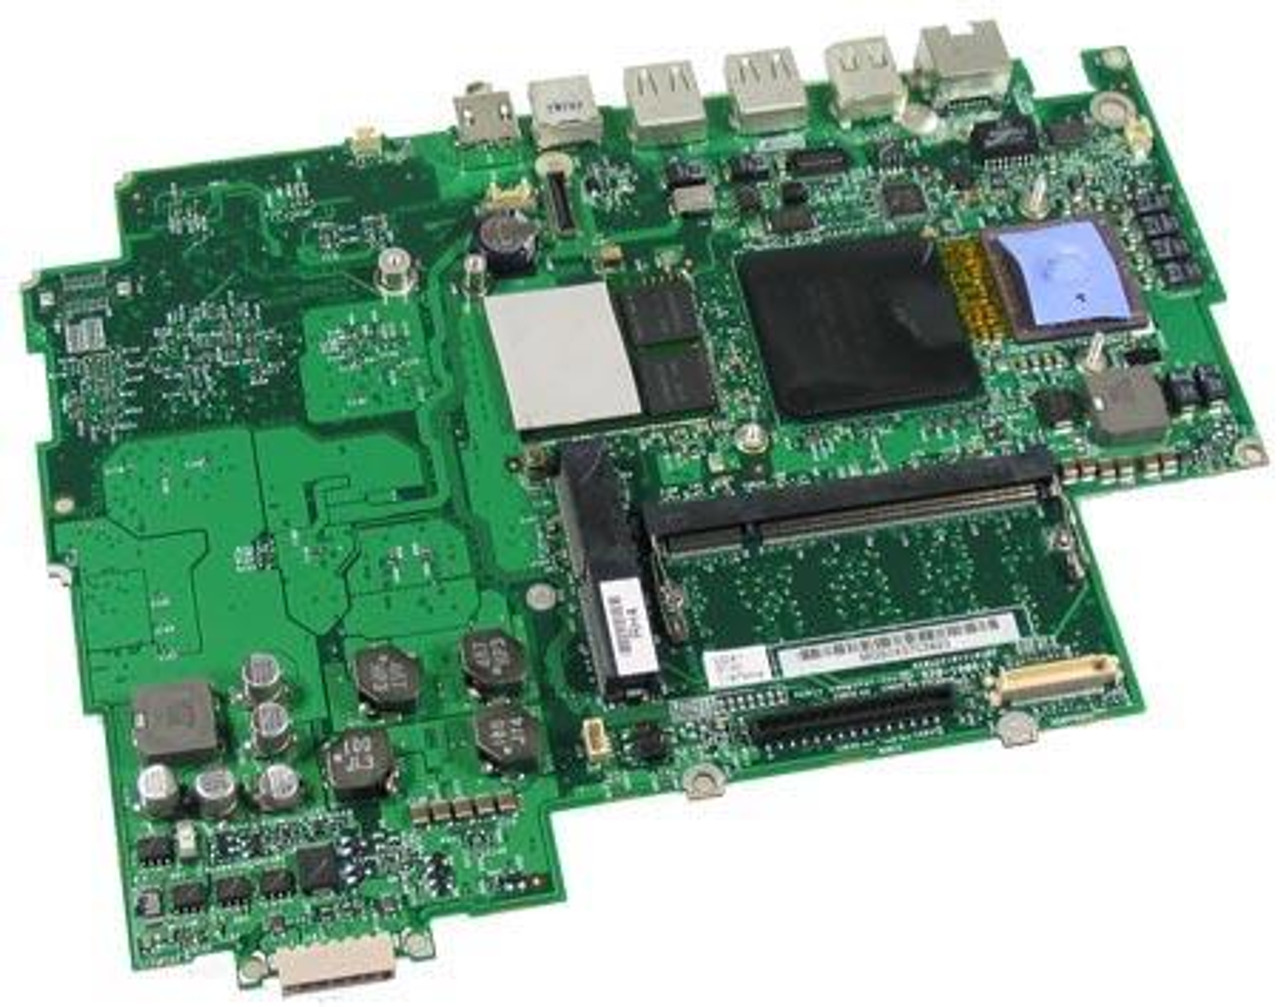 661-3344 Apple System Board (Motherboard) 1.25GHz CPU for PowerPC 7447a (G4) (Refurbished)